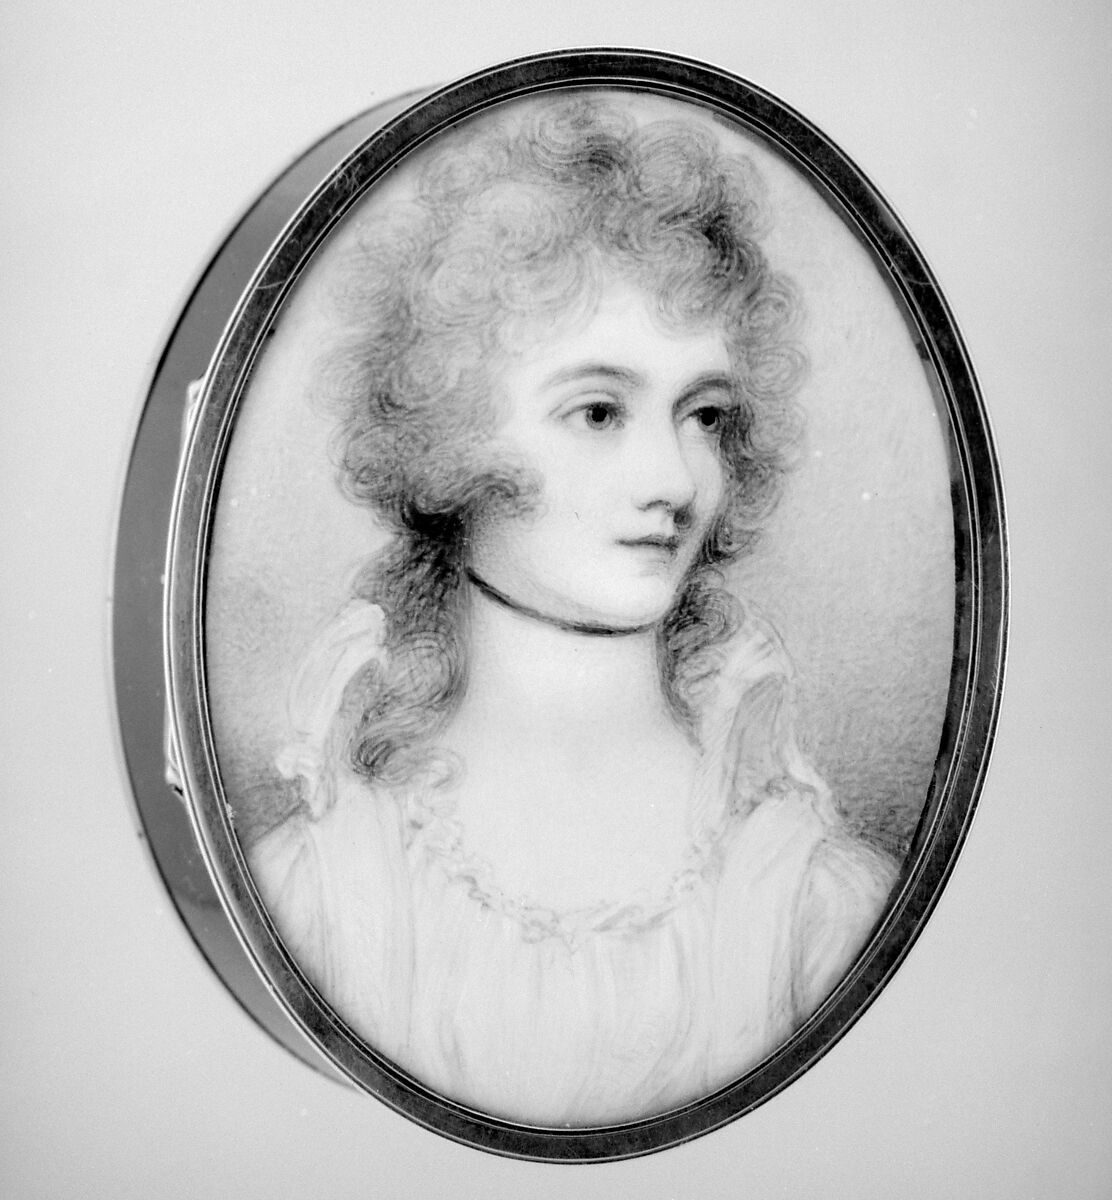 A bust-length portrait miniature of a woman looking off to her left. Her hair is curly, loosely piled on her hear, and she wears a simple choker necklace. She has a soft, neutral expression with large eyes. 